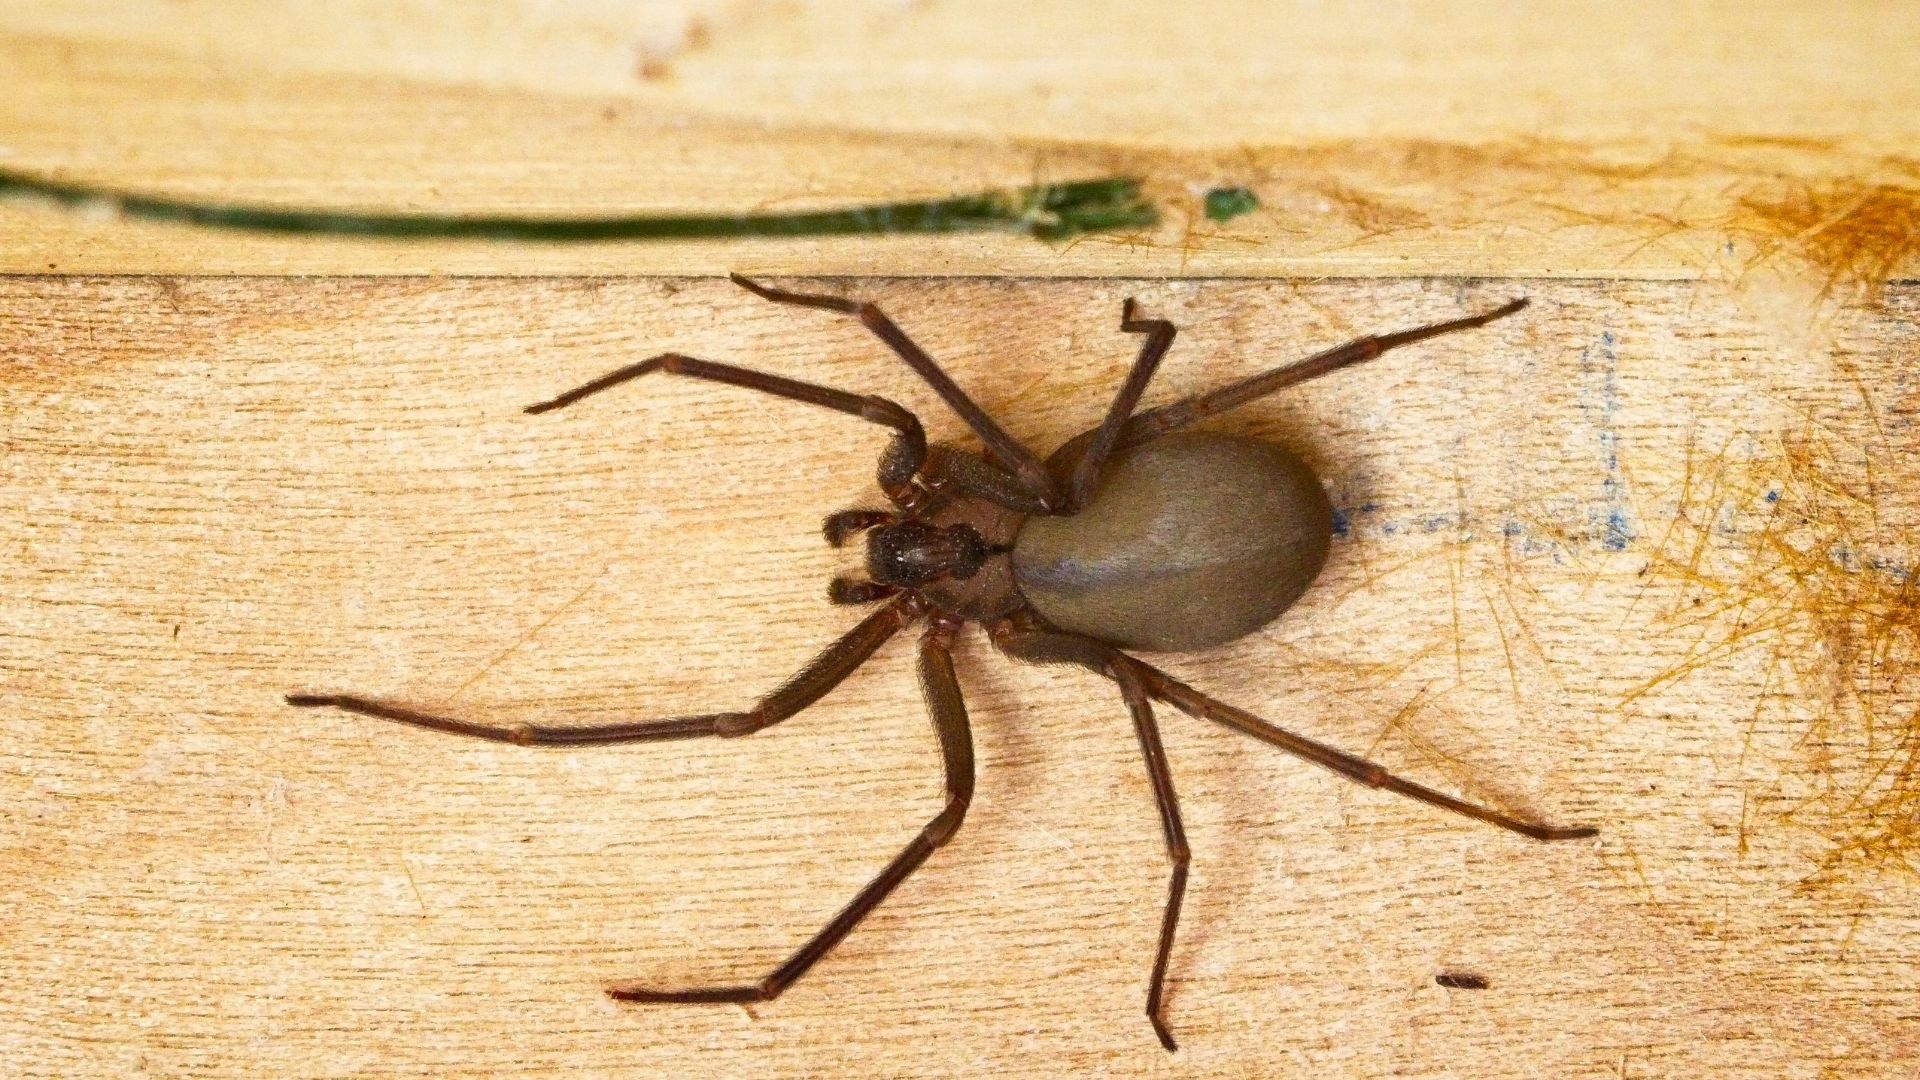 An image of a brown recluse hiding in a wooden corner.